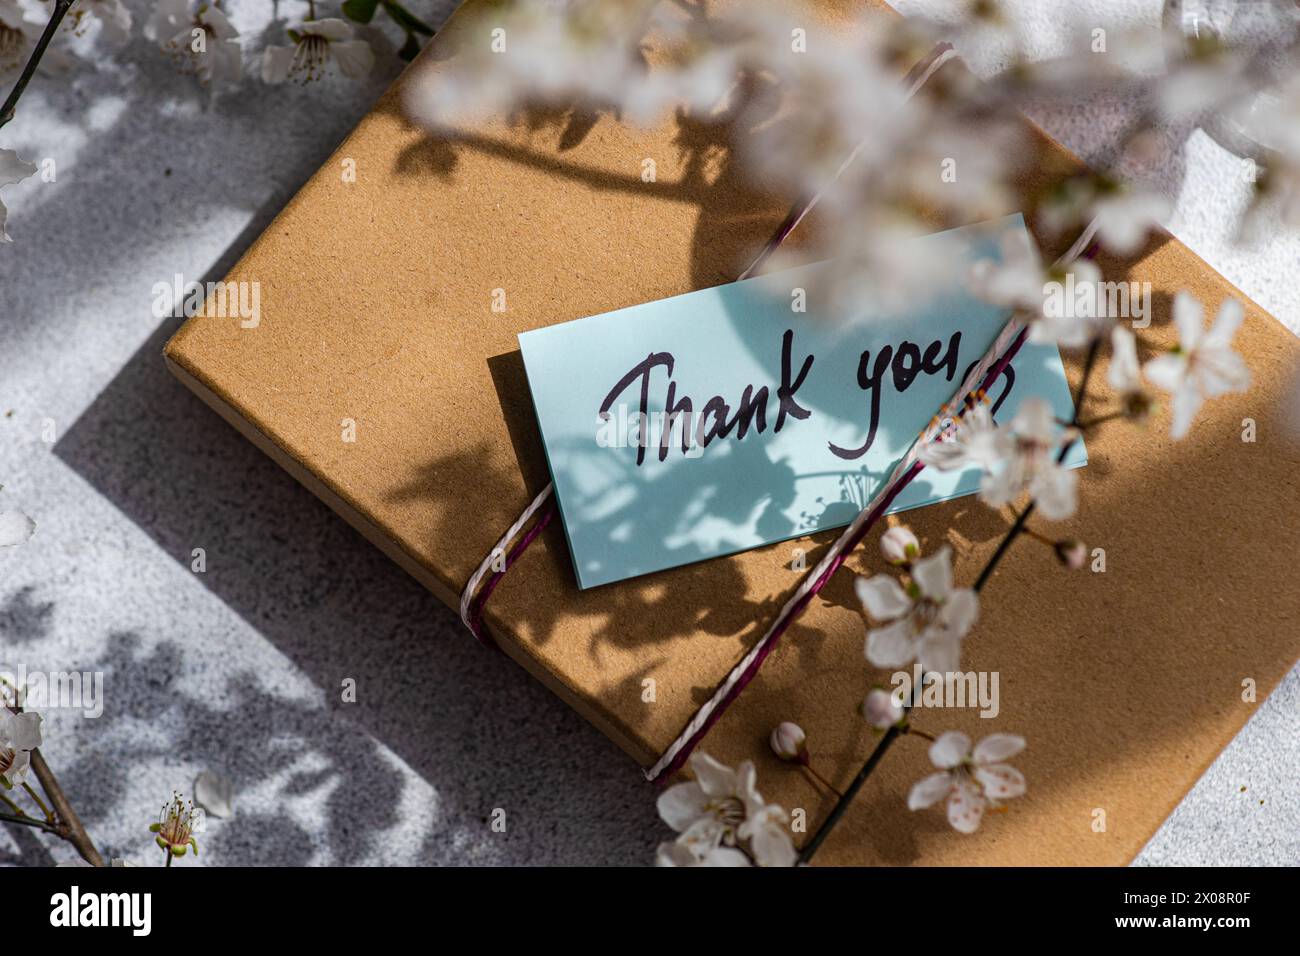 A heartfelt thank you note rests on a kraft paper gift box, delicately surrounded by the soft petals and shadows of cherry blossoms, evoking a sense o Stock Photo